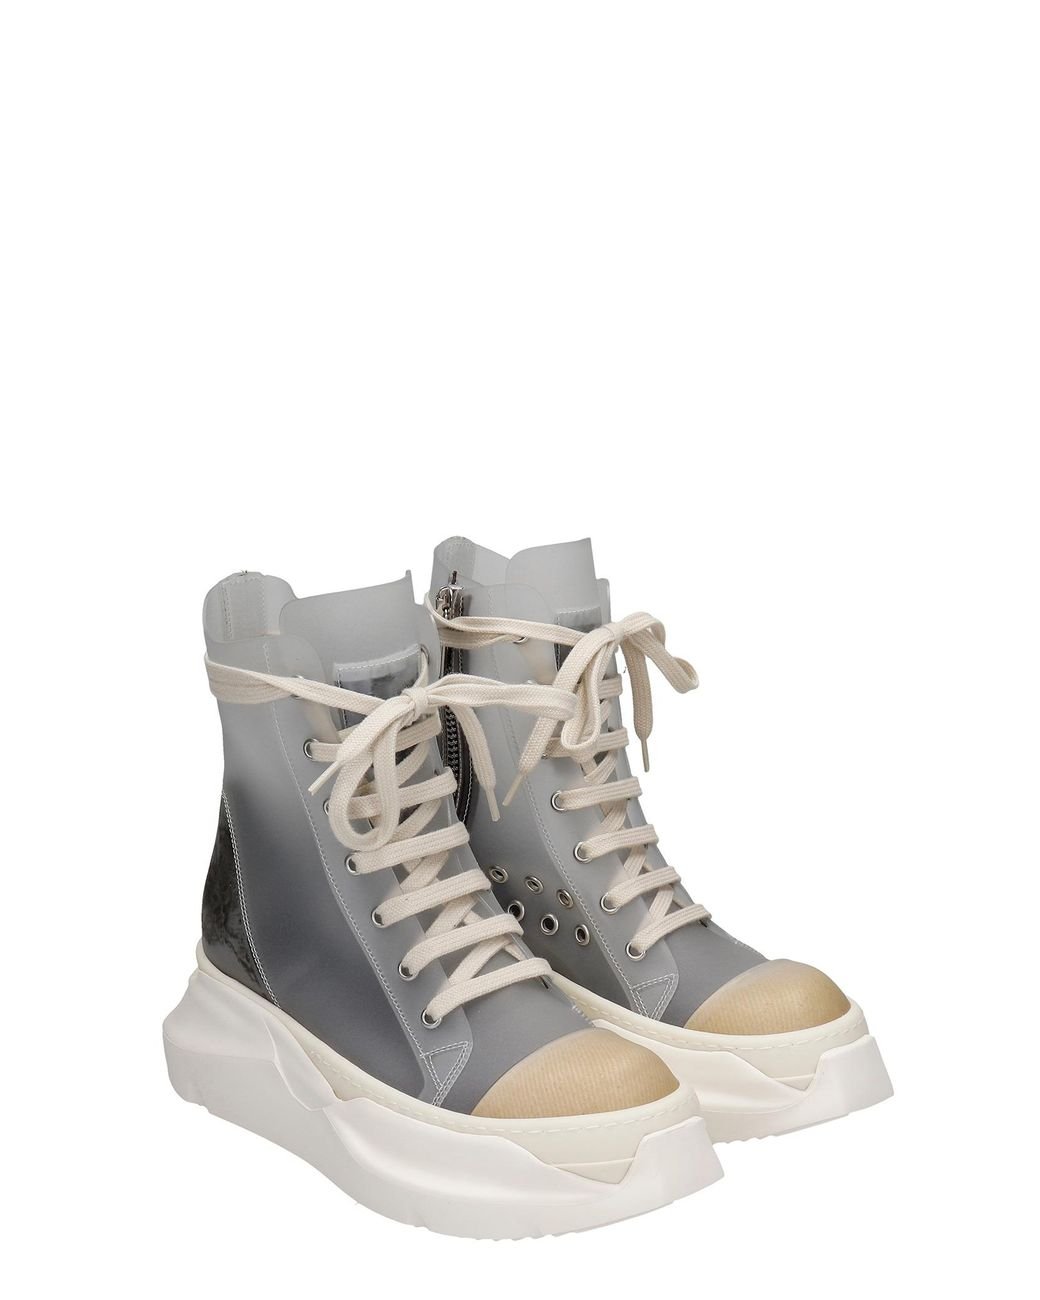 Rick Owens DRKSHDW Abstract Sneakers In Transparent Pvc in Gray   Lyst